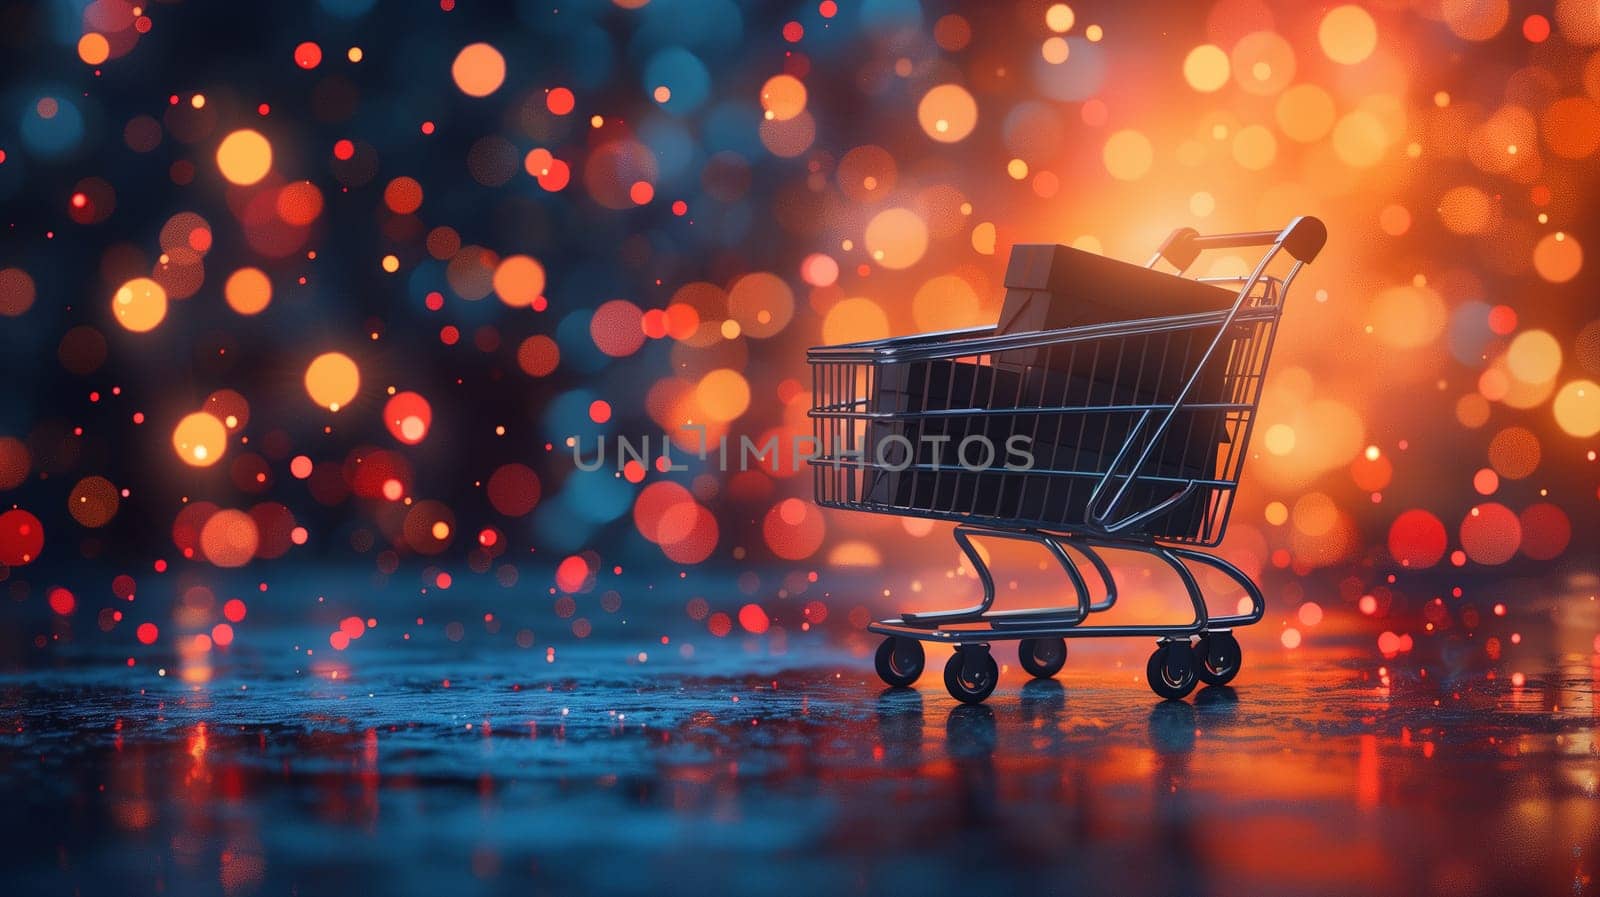 A black shopping cart is seen resting on a wet surface, possibly after a rain shower. The metal cart contrasts against the shiny wet ground, creating a simple yet striking image.